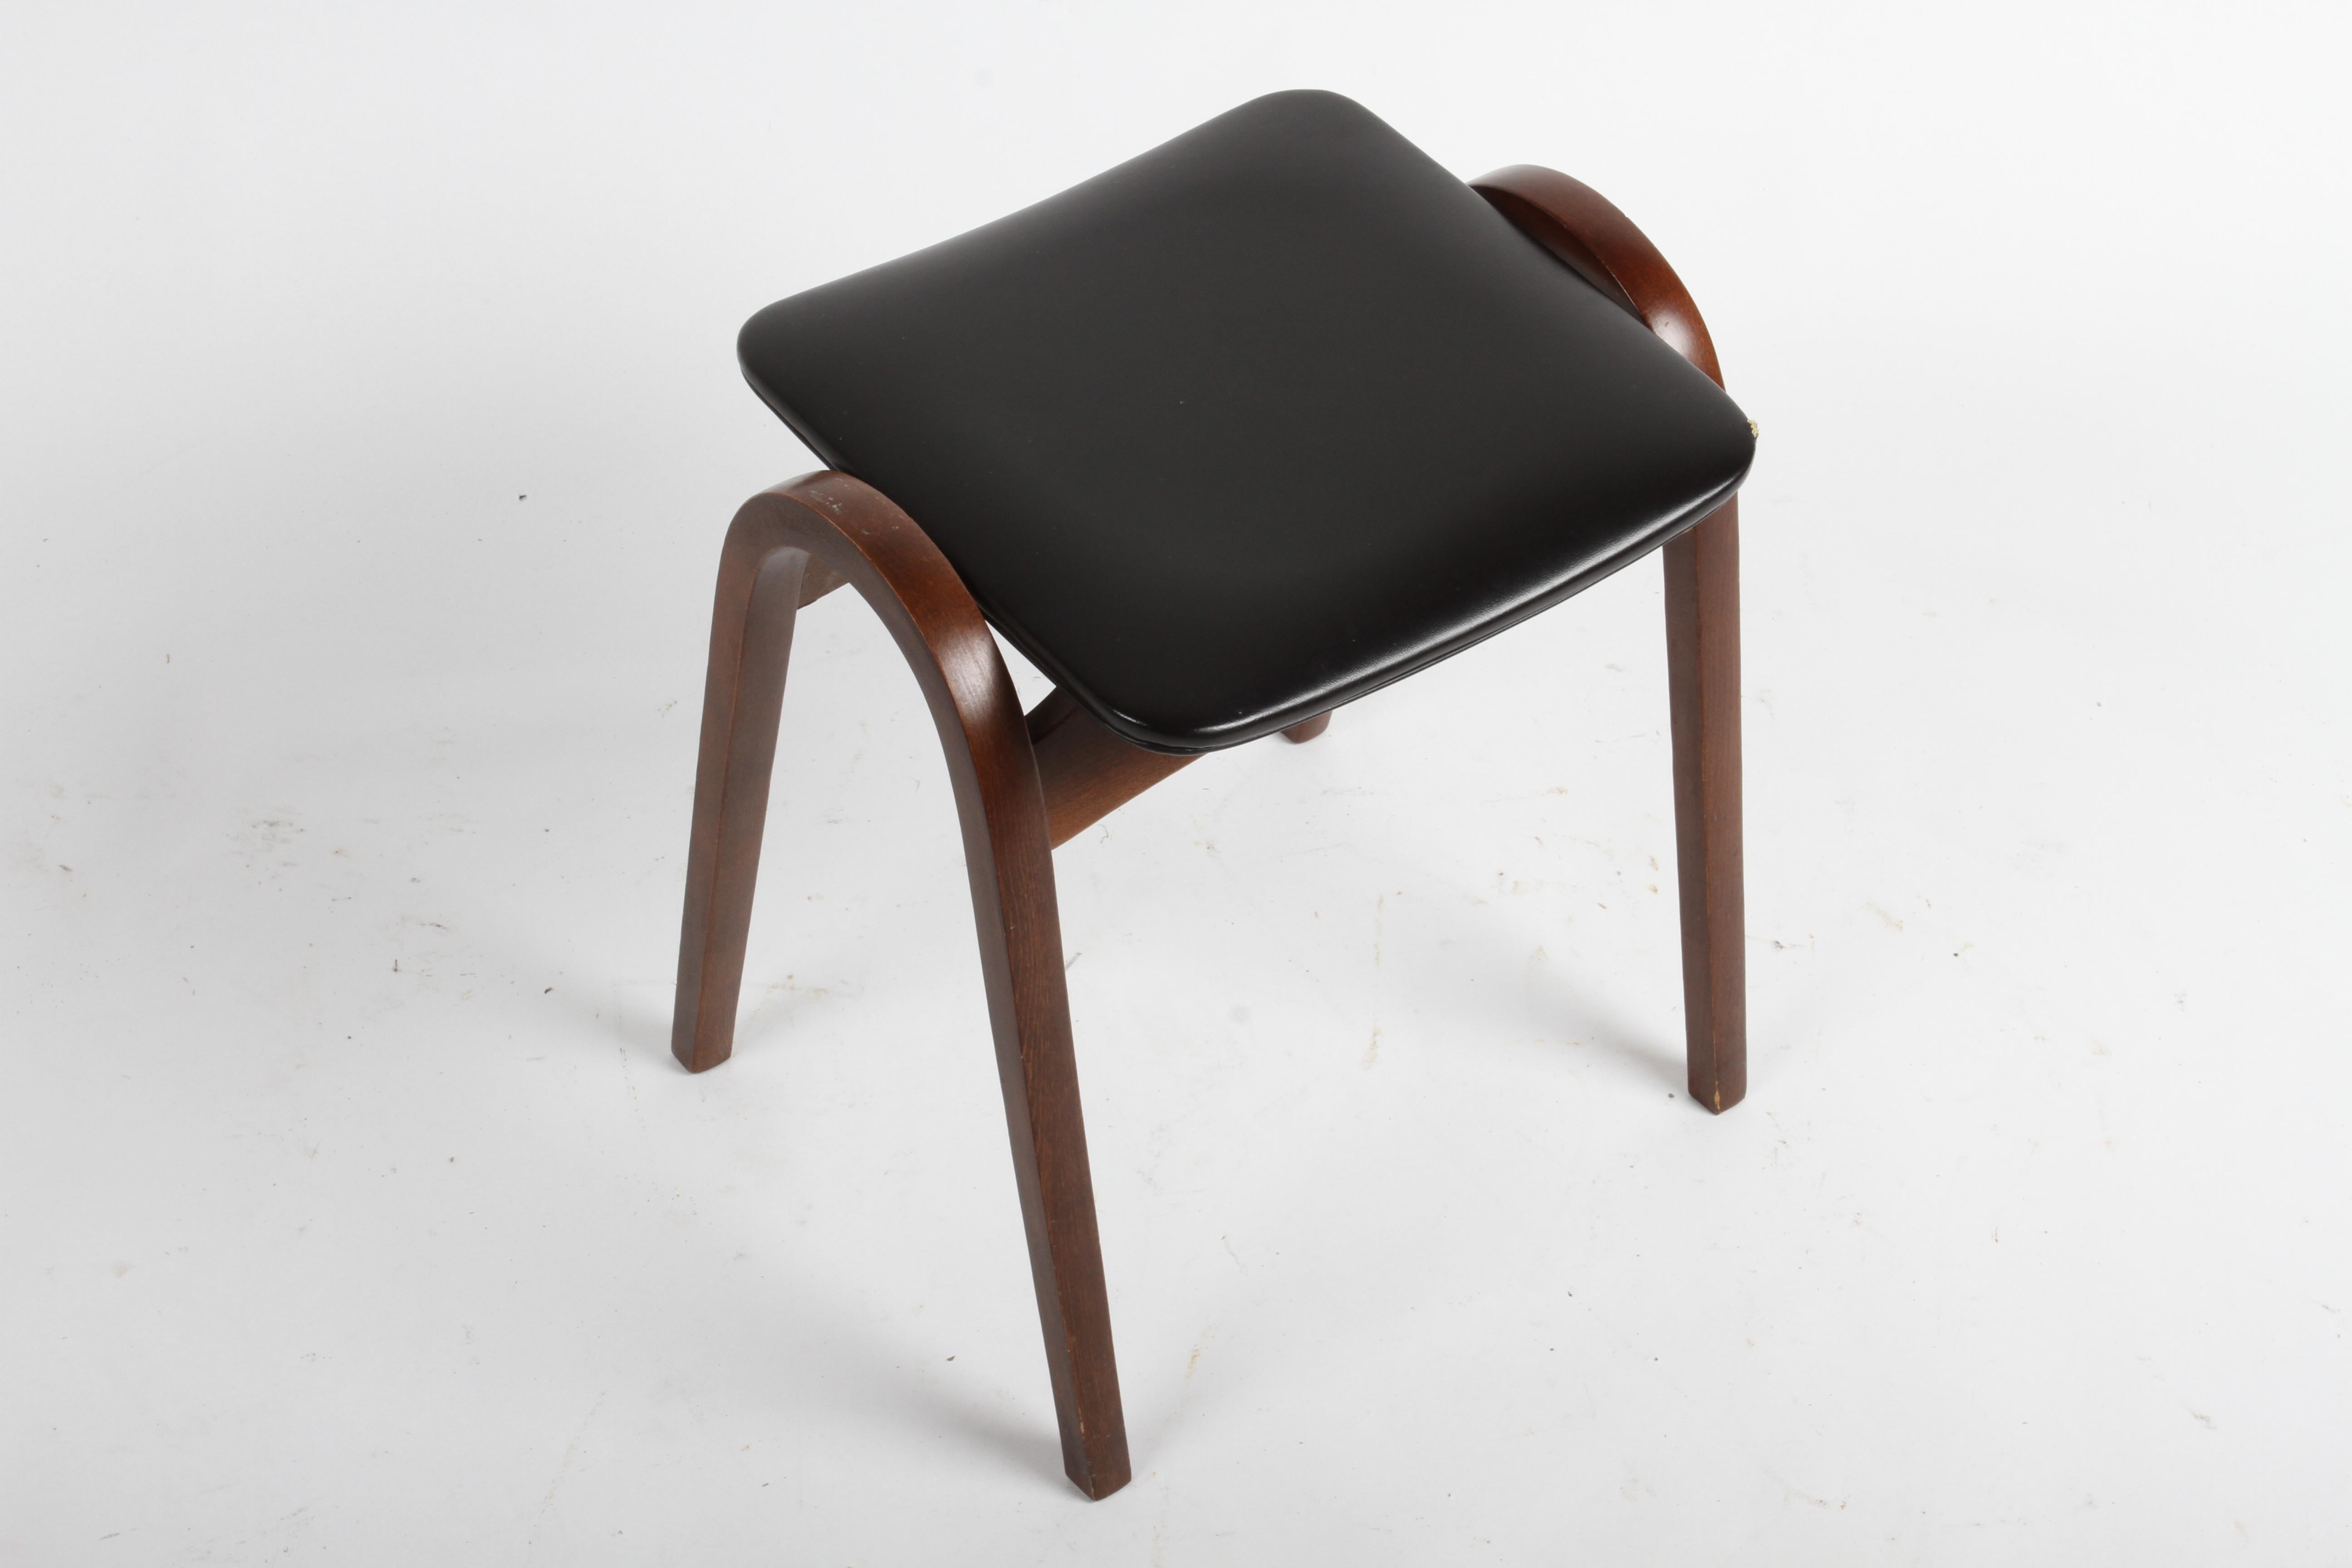 Single bentwood stool by Isamu Kenmochi (1912-1971) for Akita Mokko. Original condition, minor scuffs. Label, circa 1950s

Kenmochi was one of the most significant designers in midcentury Japan. He was a founding member of the Japan Industrial